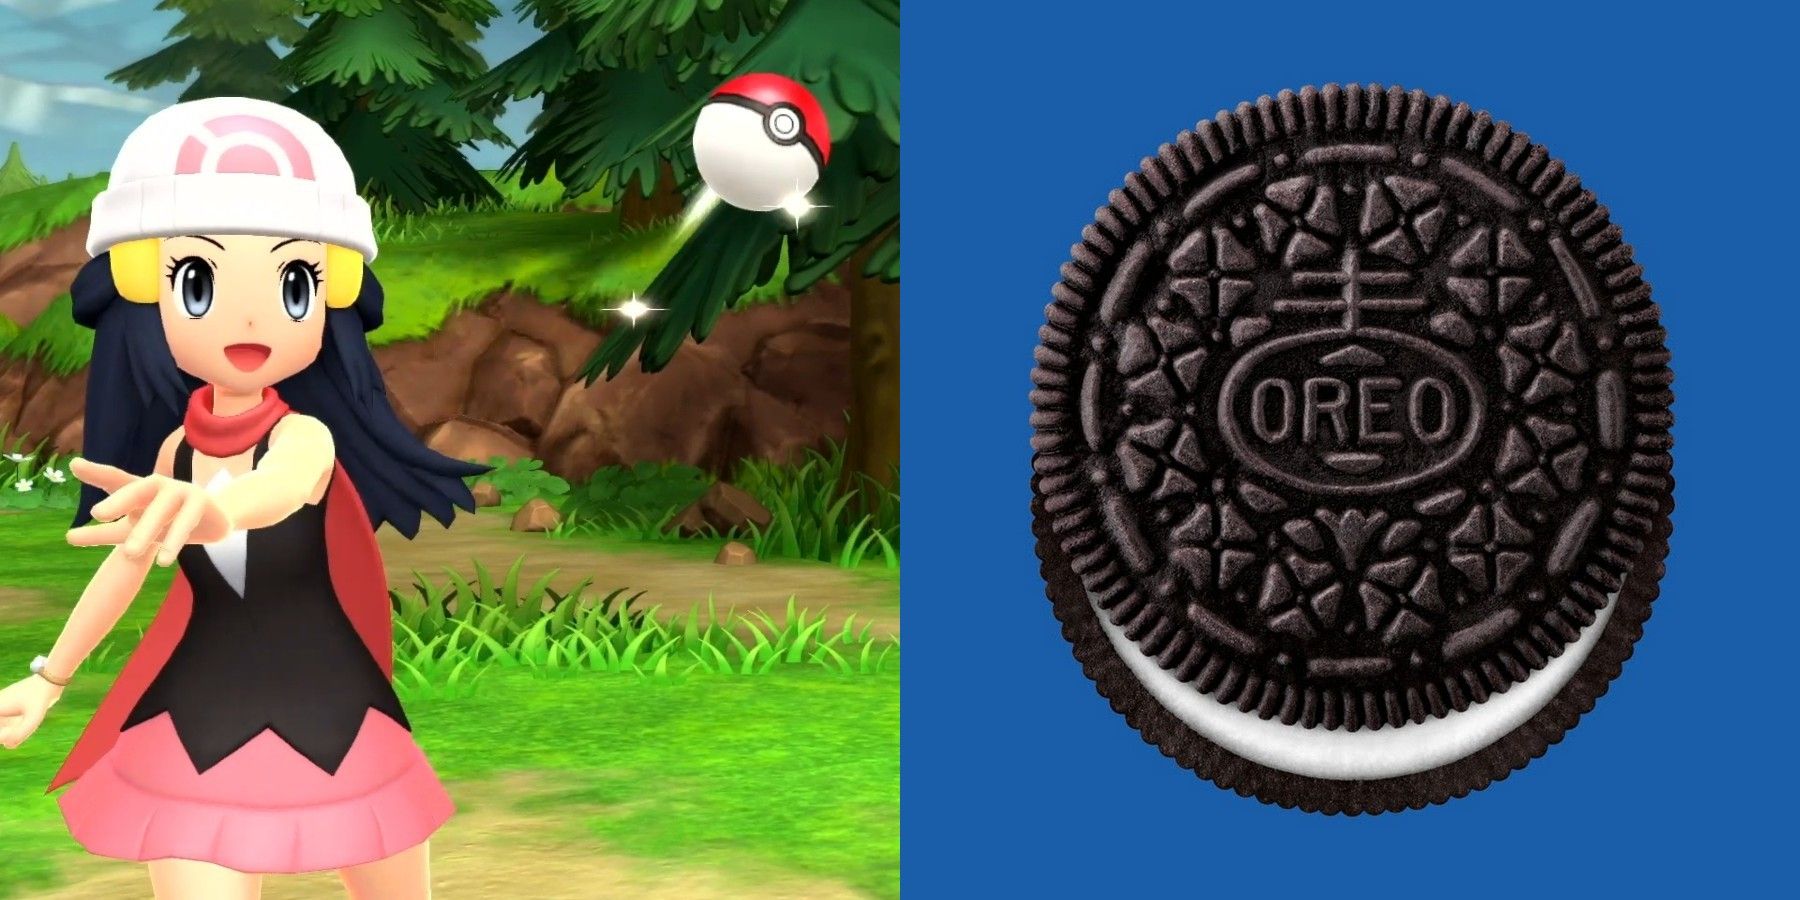 Oreo is Now Selling Limited-Edition Pokemon Cookies